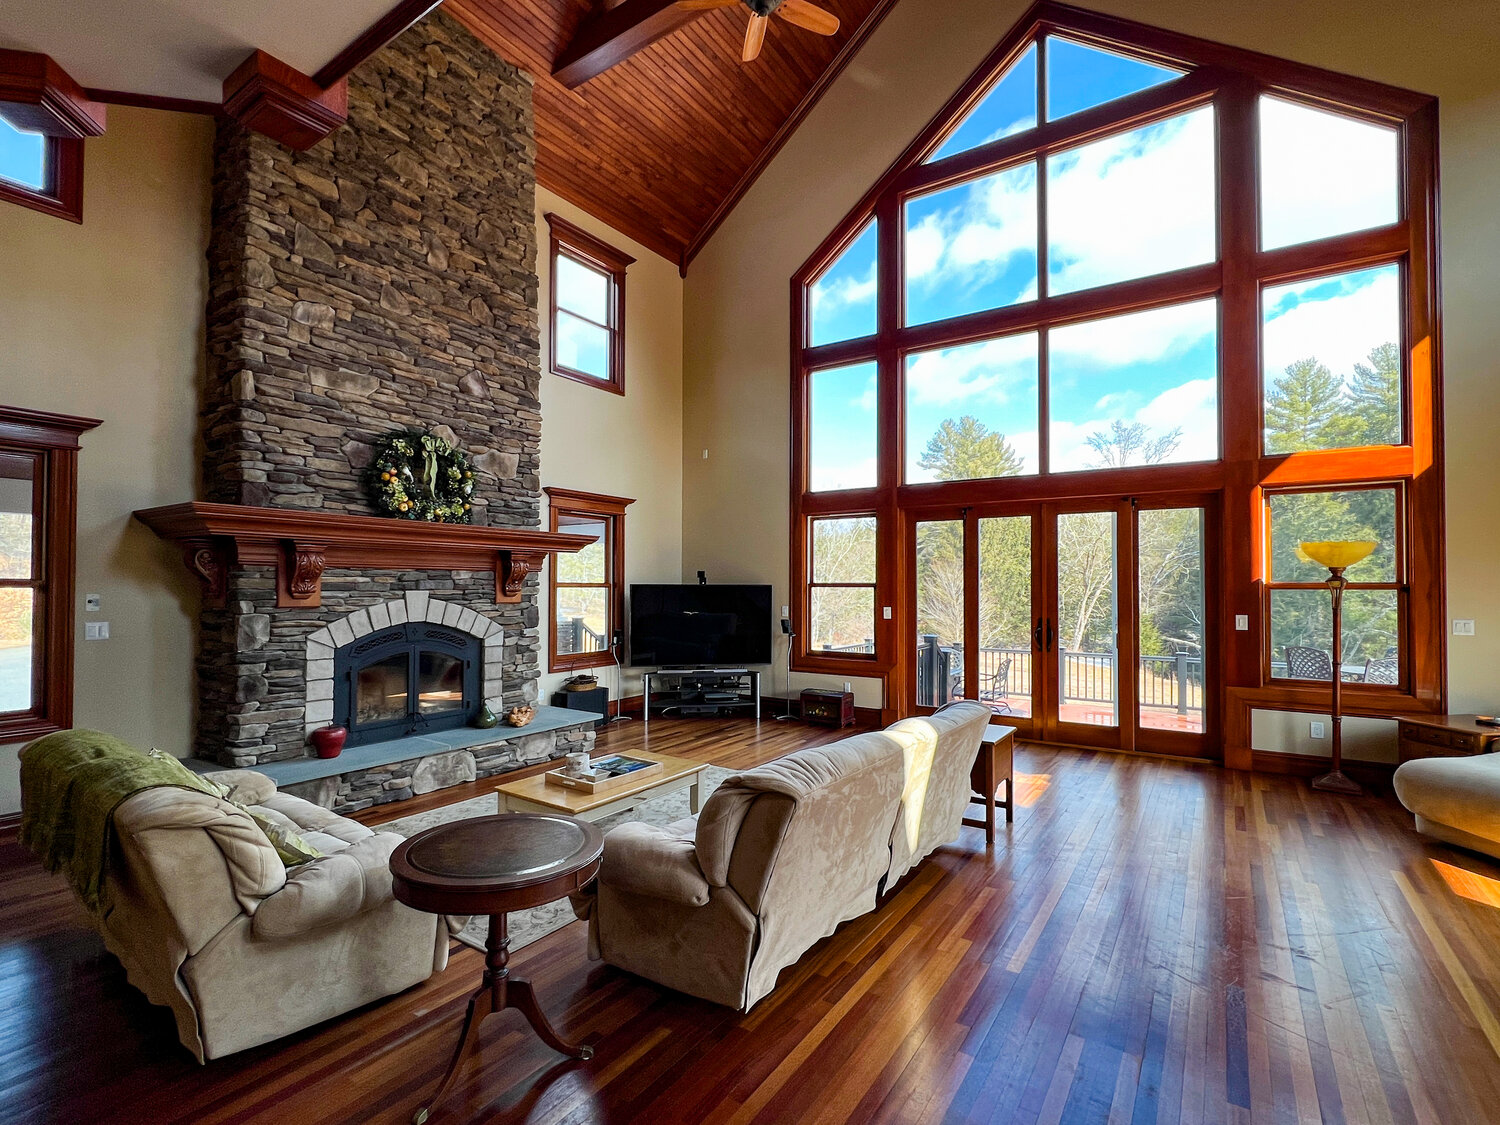 A cherrywood cathedral ceiling, wall of windows and stacked-stone fireplace are the highlights of the great room...